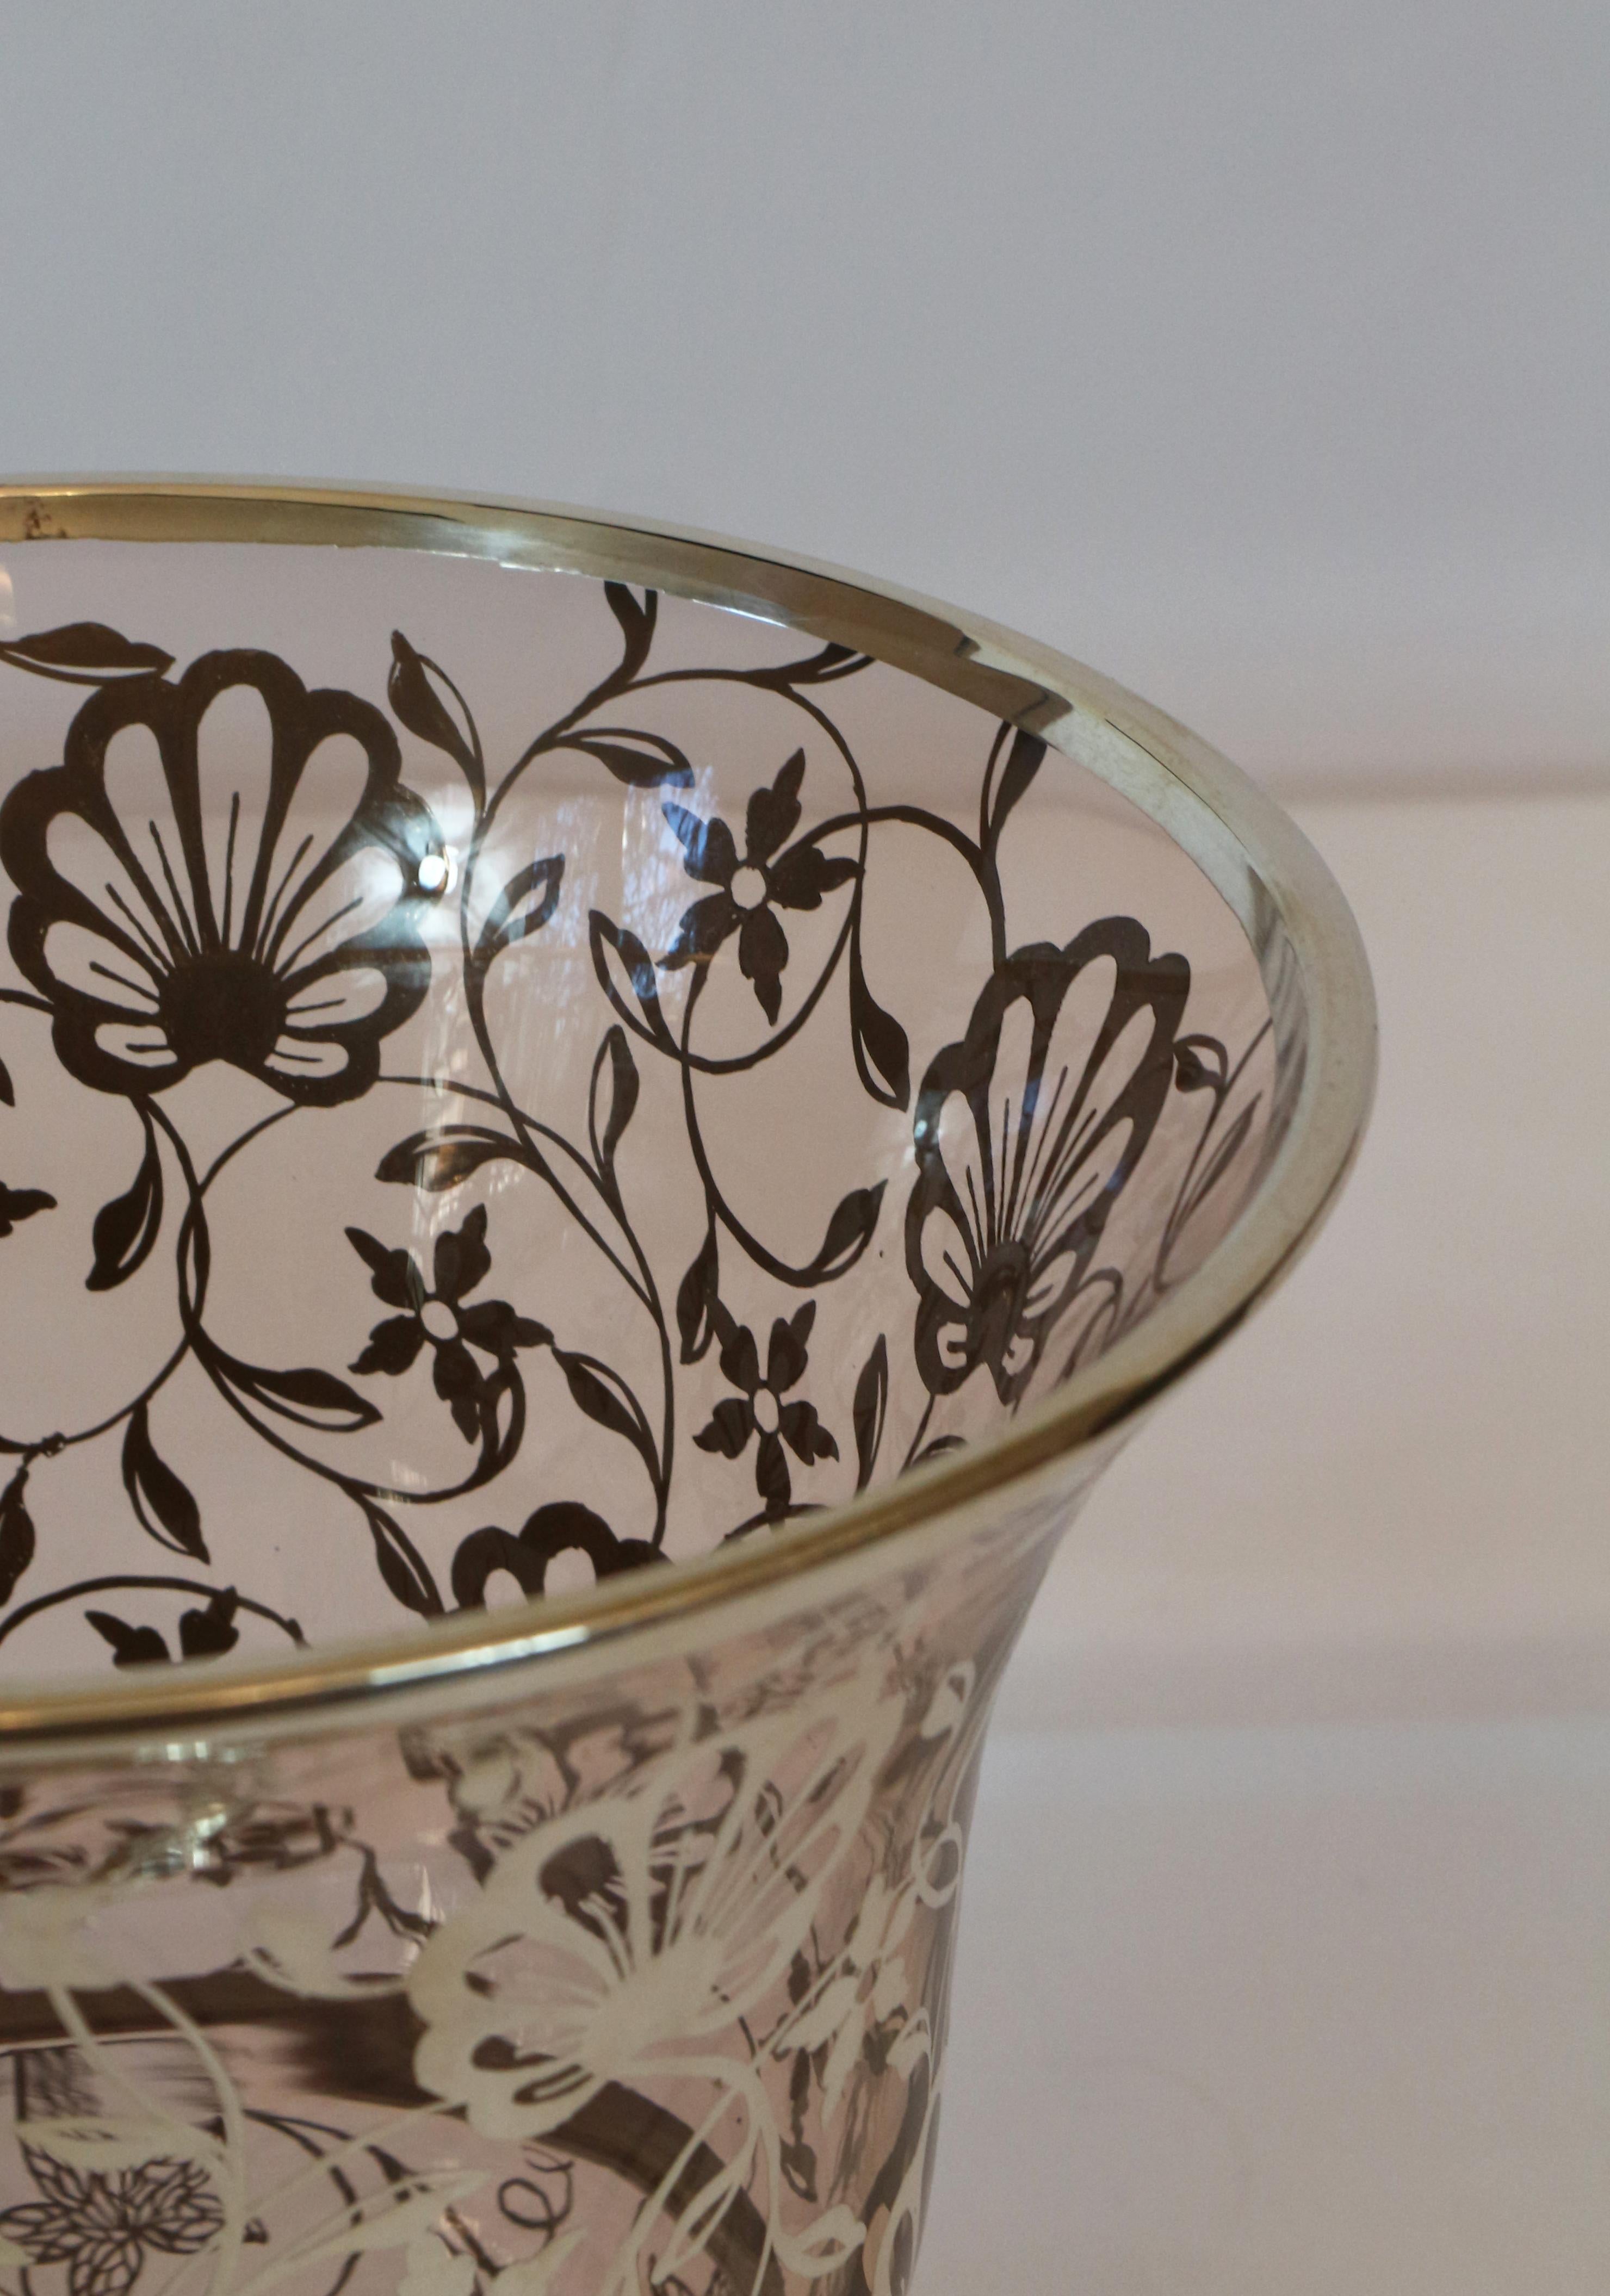  Italian art deco  glass vase covered in silver with floral motifs im Zustand „Gut“ in Carpi, Modena